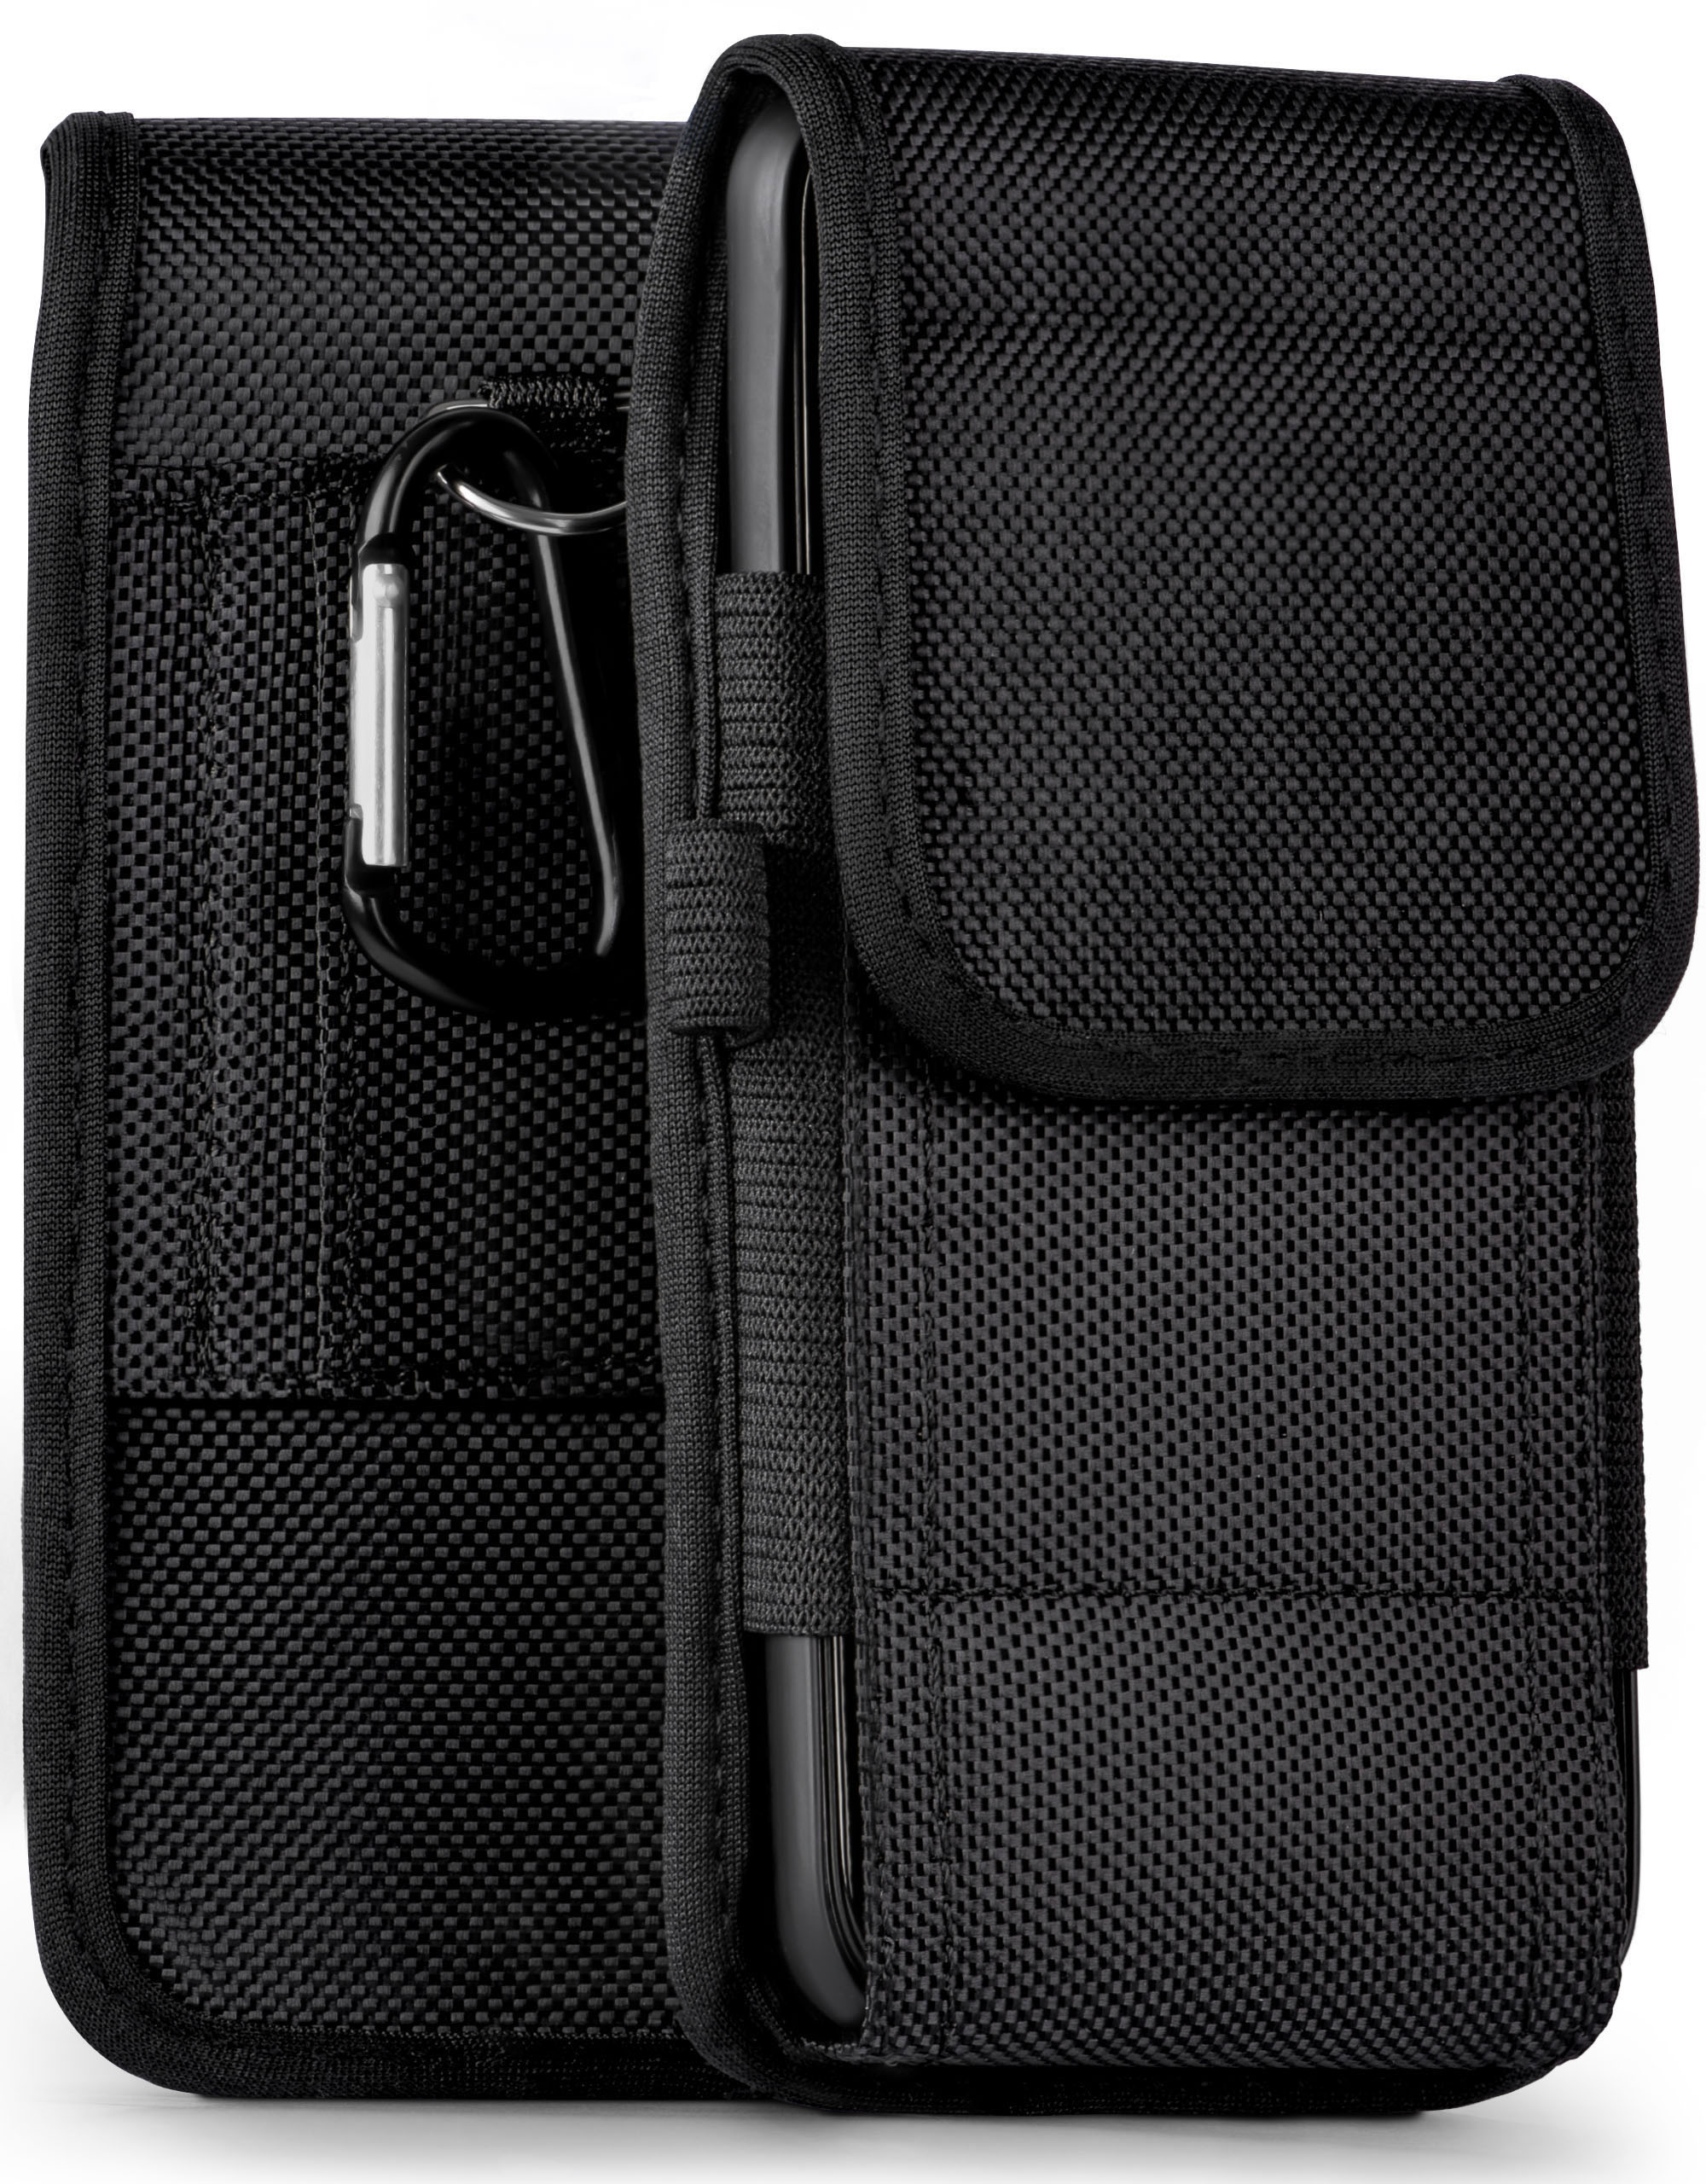 Case, Trail MEDION, E4507, Holster, MOEX Life Agility